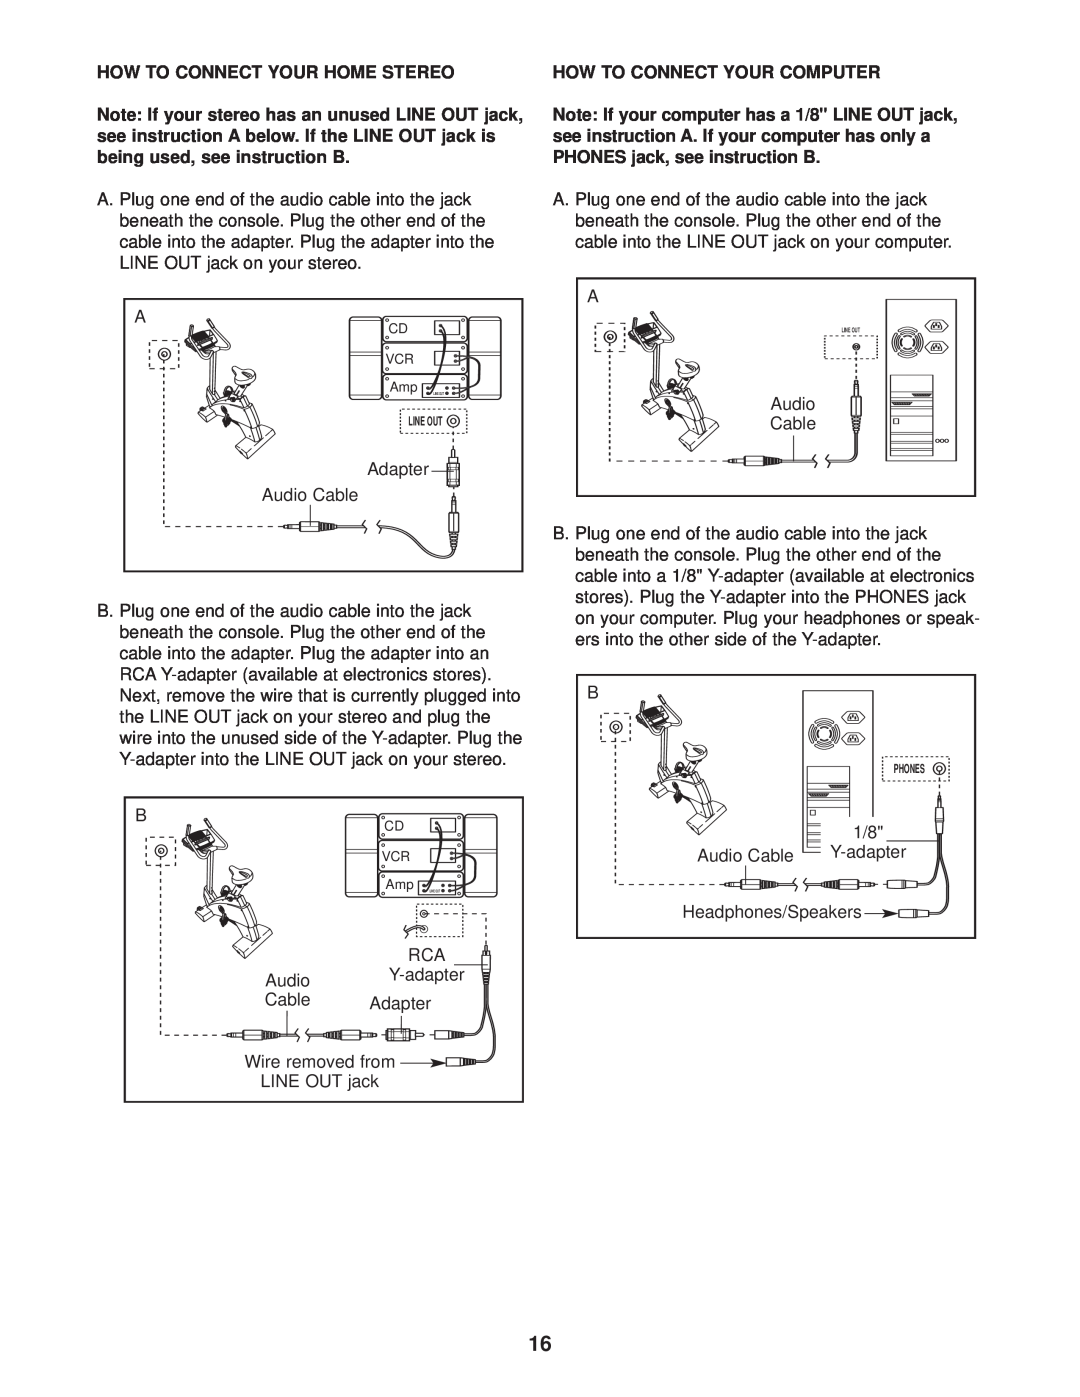 ProForm PFEX4986.0 user manual How To Connect Your Home Stereo, How To Connect Your Computer, Amp LINE OUT, Line Out 